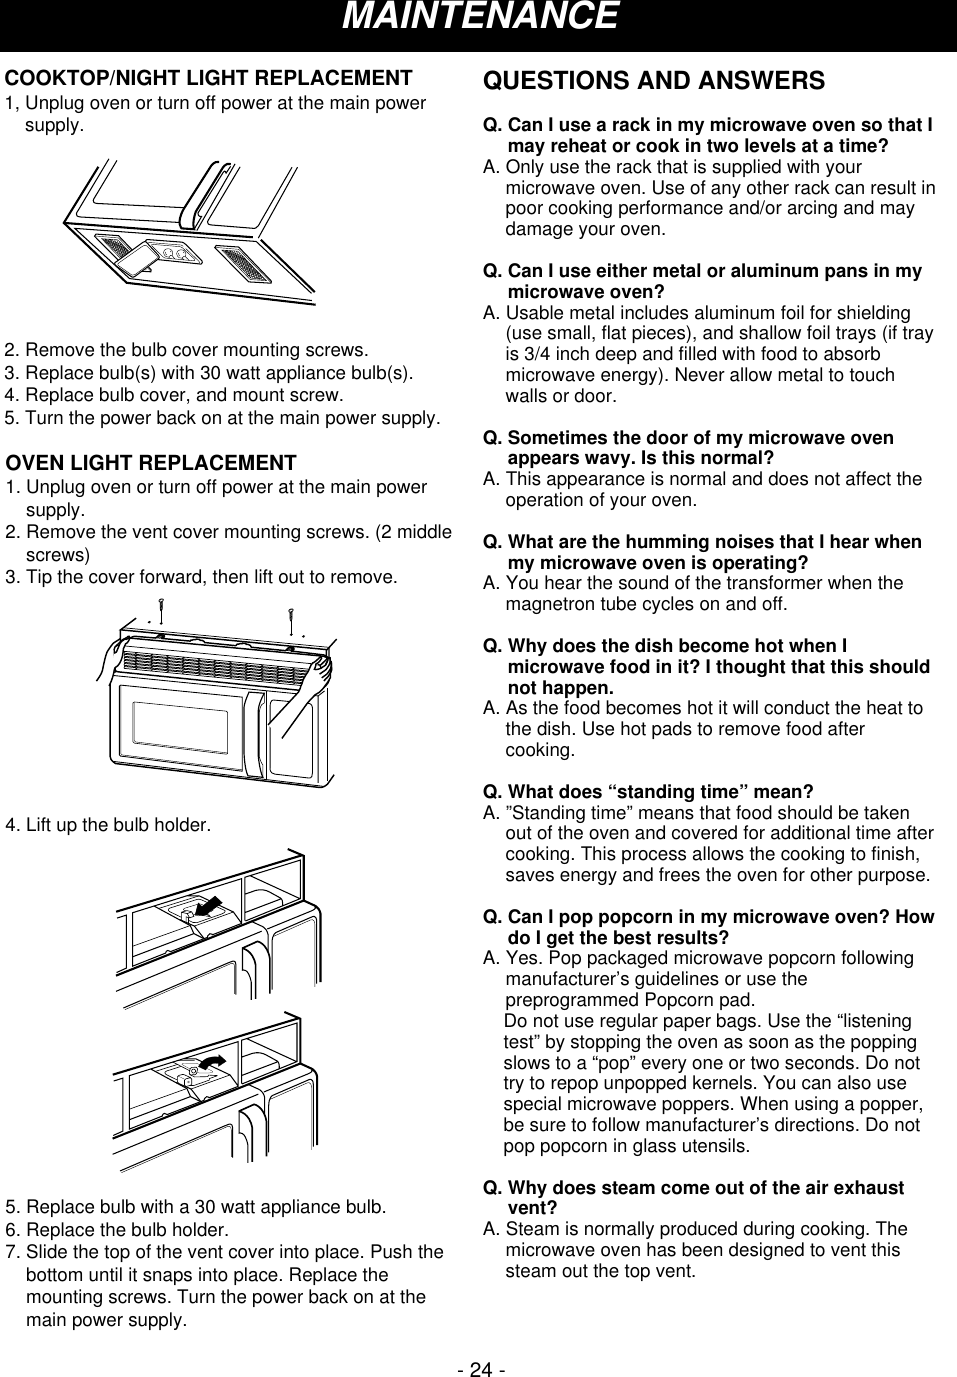 - 24 -MAINTENANCEOVEN LIGHT REPLACEMENT1. Unplug oven or turn off power at the main powersupply.2. Remove the vent cover mounting screws. (2 middlescrews)3. Tip the cover forward, then lift out to remove.4. Lift up the bulb holder.5. Replace bulb with a 30 watt appliance bulb.6. Replace the bulb holder.7. Slide the top of the vent cover into place. Push thebottom until it snaps into place. Replace themounting screws. Turn the power back on at themain power supply. COOKTOP/NIGHT LIGHT REPLACEMENT1, Unplug oven or turn off power at the main powersupply.2. Remove the bulb cover mounting screws.3. Replace bulb(s) with 30 watt appliance bulb(s).4. Replace bulb cover, and mount screw.5. Turn the power back on at the main power supply.QUESTIONS AND ANSWERSQ. Can I use a rack in my microwave oven so that Imay reheat or cook in two levels at a time?A. Only use the rack that is supplied with yourmicrowave oven. Use of any other rack can result inpoor cooking performance and/or arcing and maydamage your oven.Q. Can I use either metal or aluminum pans in mymicrowave oven?A. Usable metal includes aluminum foil for shielding(use small, flat pieces), and shallow foil trays (if trayis 3/4 inch deep and filled with food to absorbmicrowave energy). Never allow metal to touchwalls or door.Q. Sometimes the door of my microwave ovenappears wavy. Is this normal?A. This appearance is normal and does not affect theoperation of your oven.Q. What are the humming noises that I hear whenmy microwave oven is operating?A. You hear the sound of the transformer when themagnetron tube cycles on and off.Q. Why does the dish become hot when Imicrowave food in it? I thought that this shouldnot happen.A. As the food becomes hot it will conduct the heat tothe dish. Use hot pads to remove food aftercooking.Q. What does “standing time” mean?A. ”Standing time” means that food should be takenout of the oven and covered for additional time aftercooking. This process allows the cooking to finish,saves energy and frees the oven for other purpose.Q. Can I pop popcorn in my microwave oven? Howdo I get the best results?A. Yes. Pop packaged microwave popcorn followingmanufacturer’s guidelines or use thepreprogrammed Popcorn pad.     Do not use regular paper bags. Use the “listeningtest” by stopping the oven as soon as the poppingslows to a “pop” every one or two seconds. Do nottry to repop unpopped kernels. You can also usespecial microwave poppers. When using a popper,be sure to follow manufacturer’s directions. Do notpop popcorn in glass utensils.Q. Why does steam come out of the air exhaustvent?A. Steam is normally produced during cooking. Themicrowave oven has been designed to vent thissteam out the top vent.